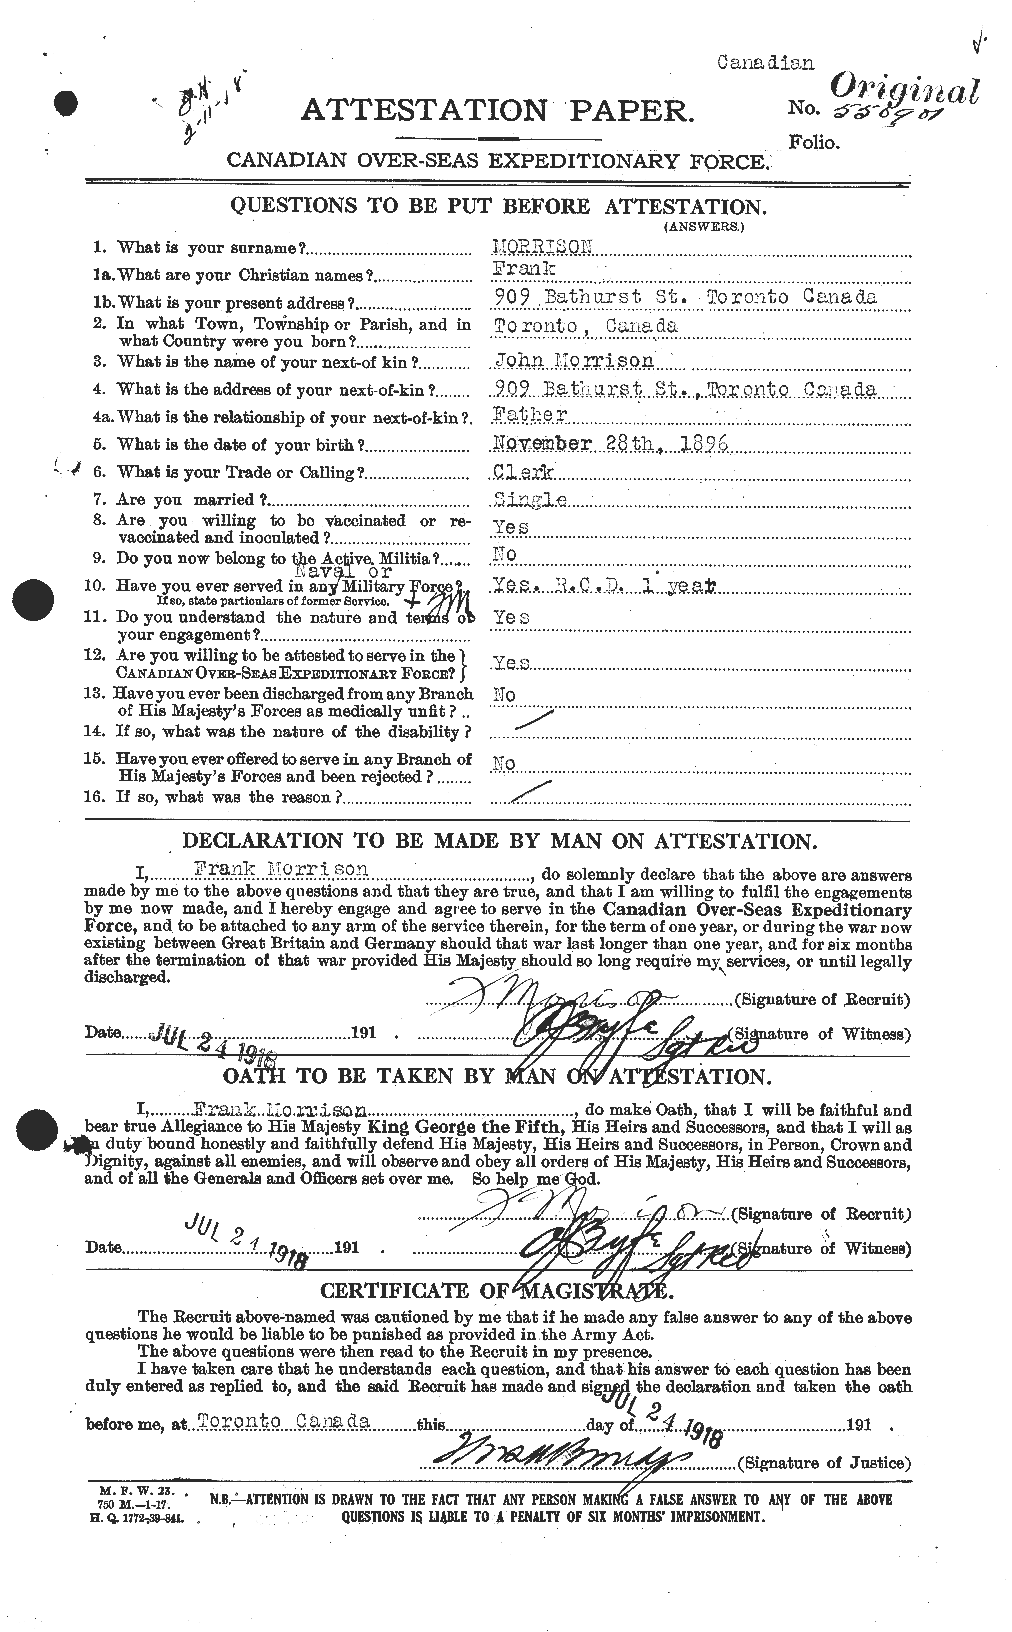 Personnel Records of the First World War - CEF 505541a